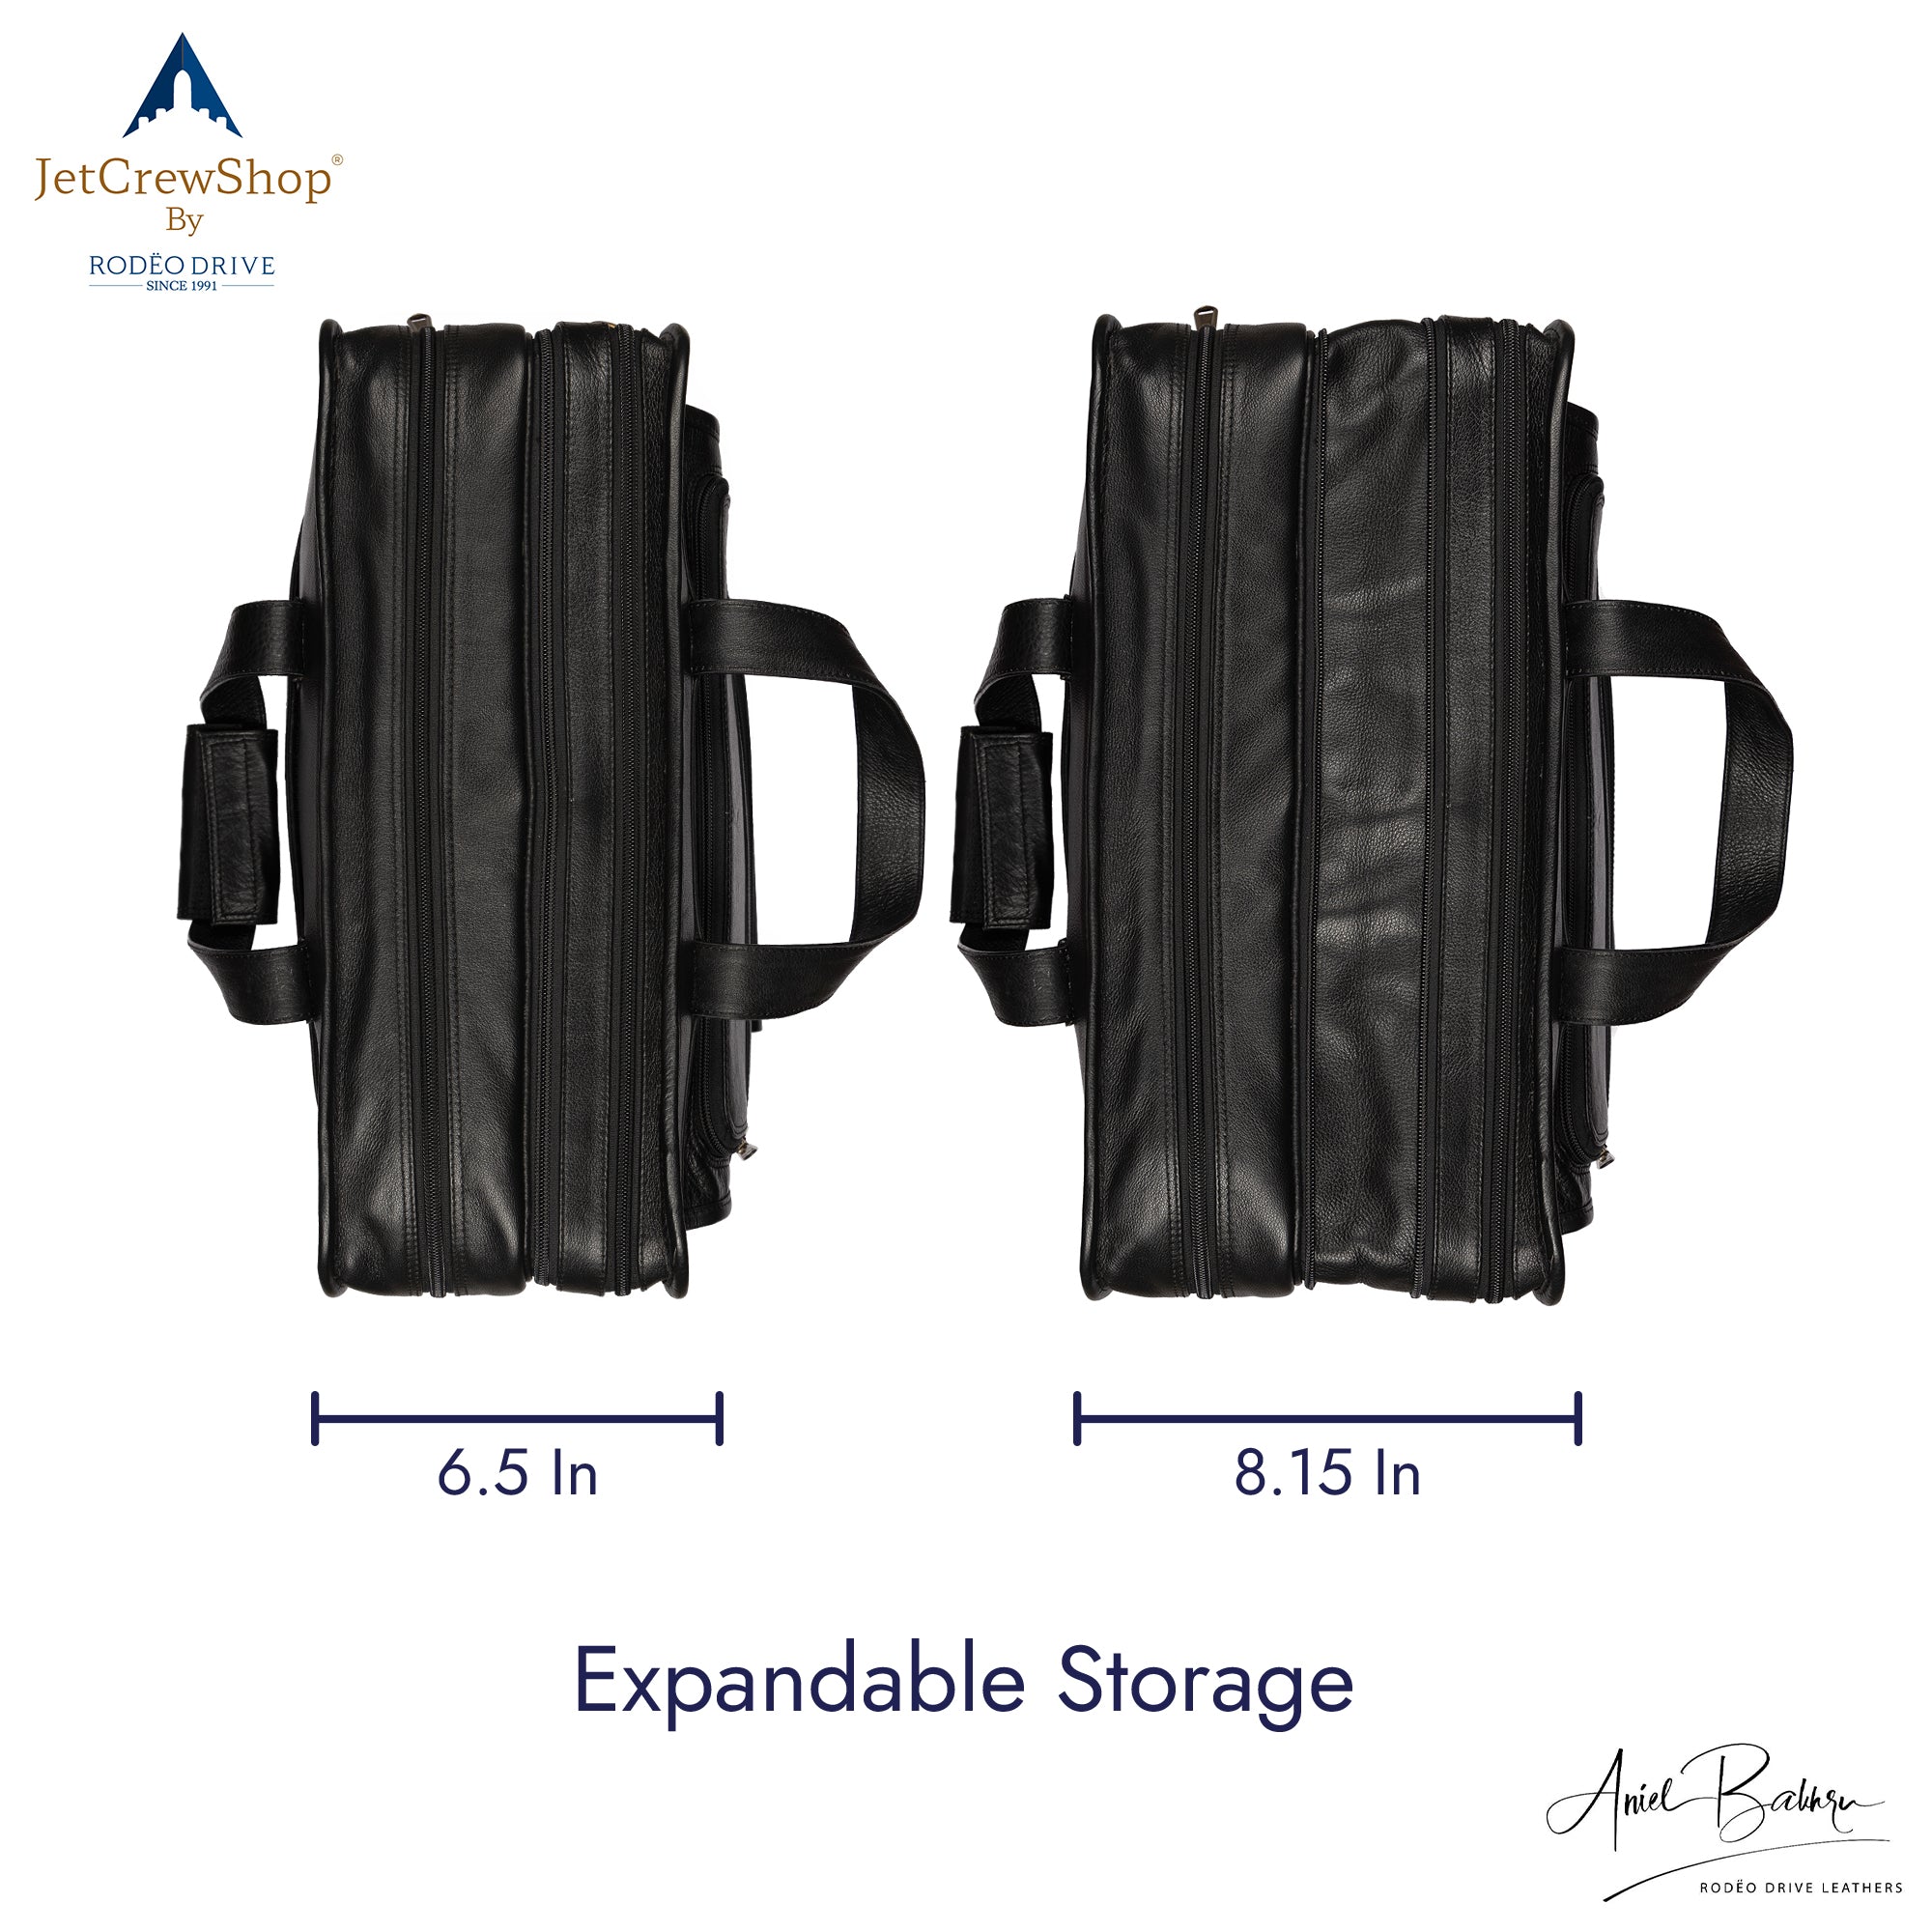 image depicting dimensions of PILOT BAG. Bag is expandable from 6.5 In to 8.15 In